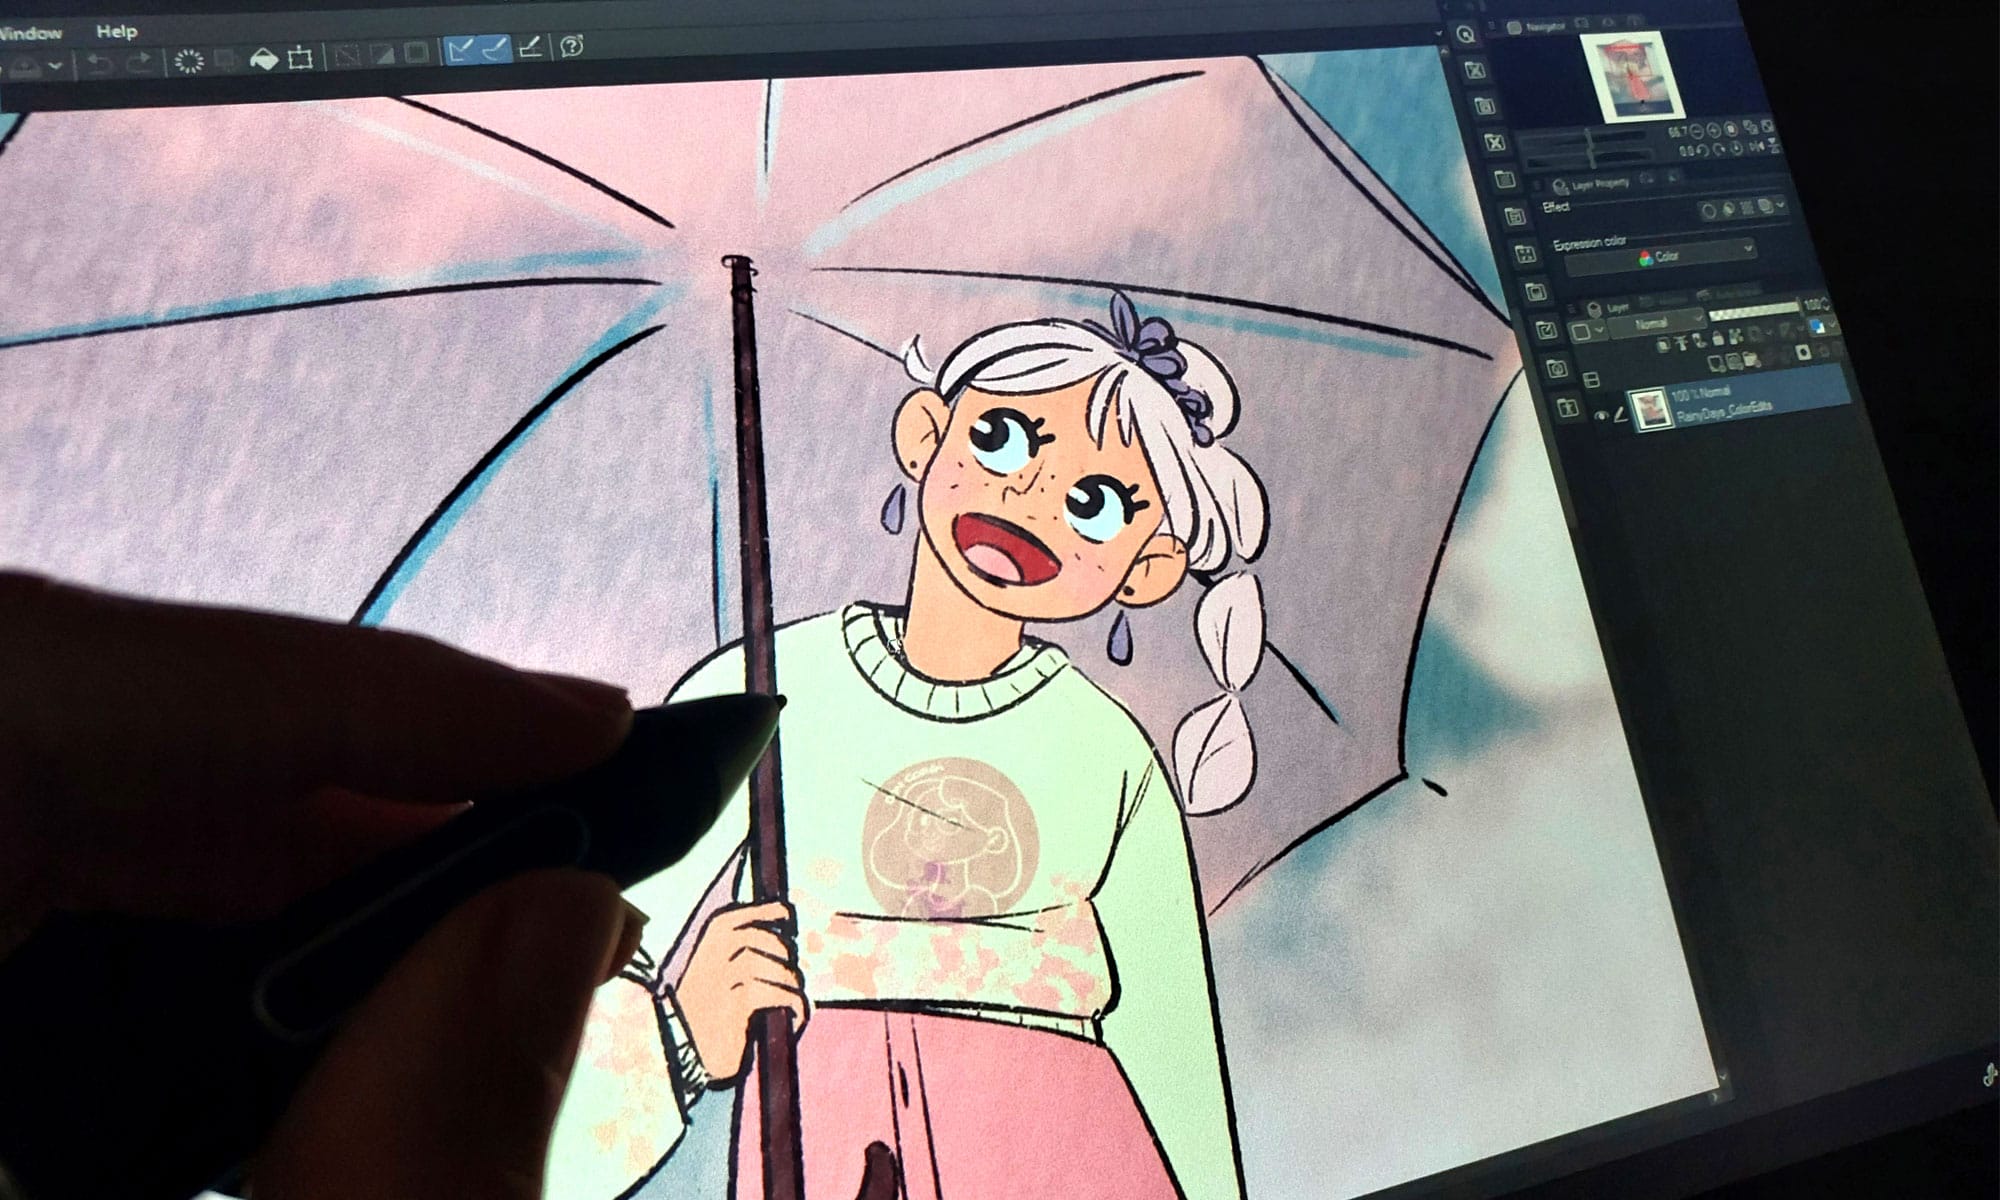 Kamvas 13 Display Tablet being used by Patricia Caldeira, showing a digital painting done in Clip Studio Paint.